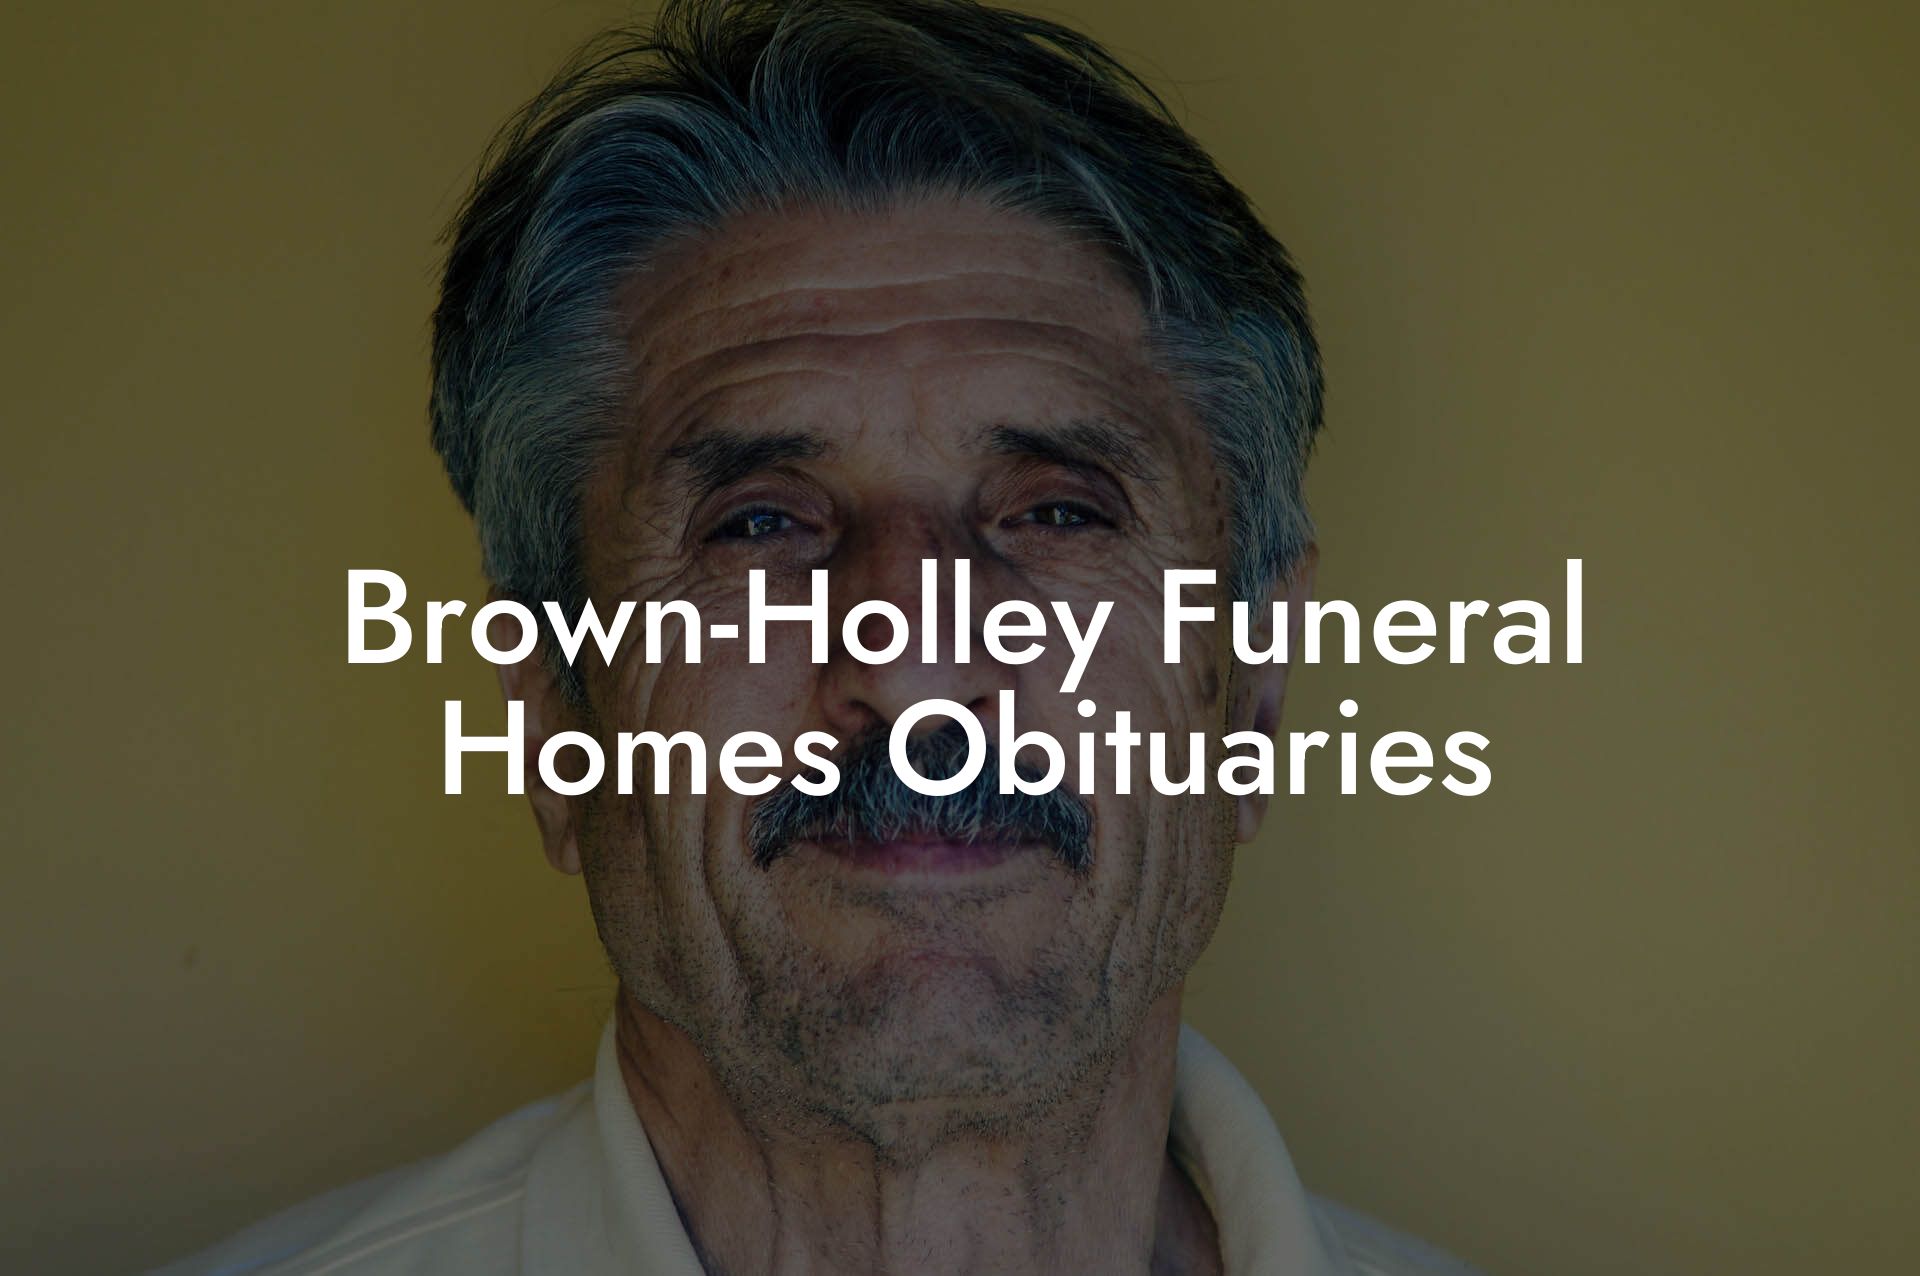 Brown-Holley Funeral Homes Obituaries